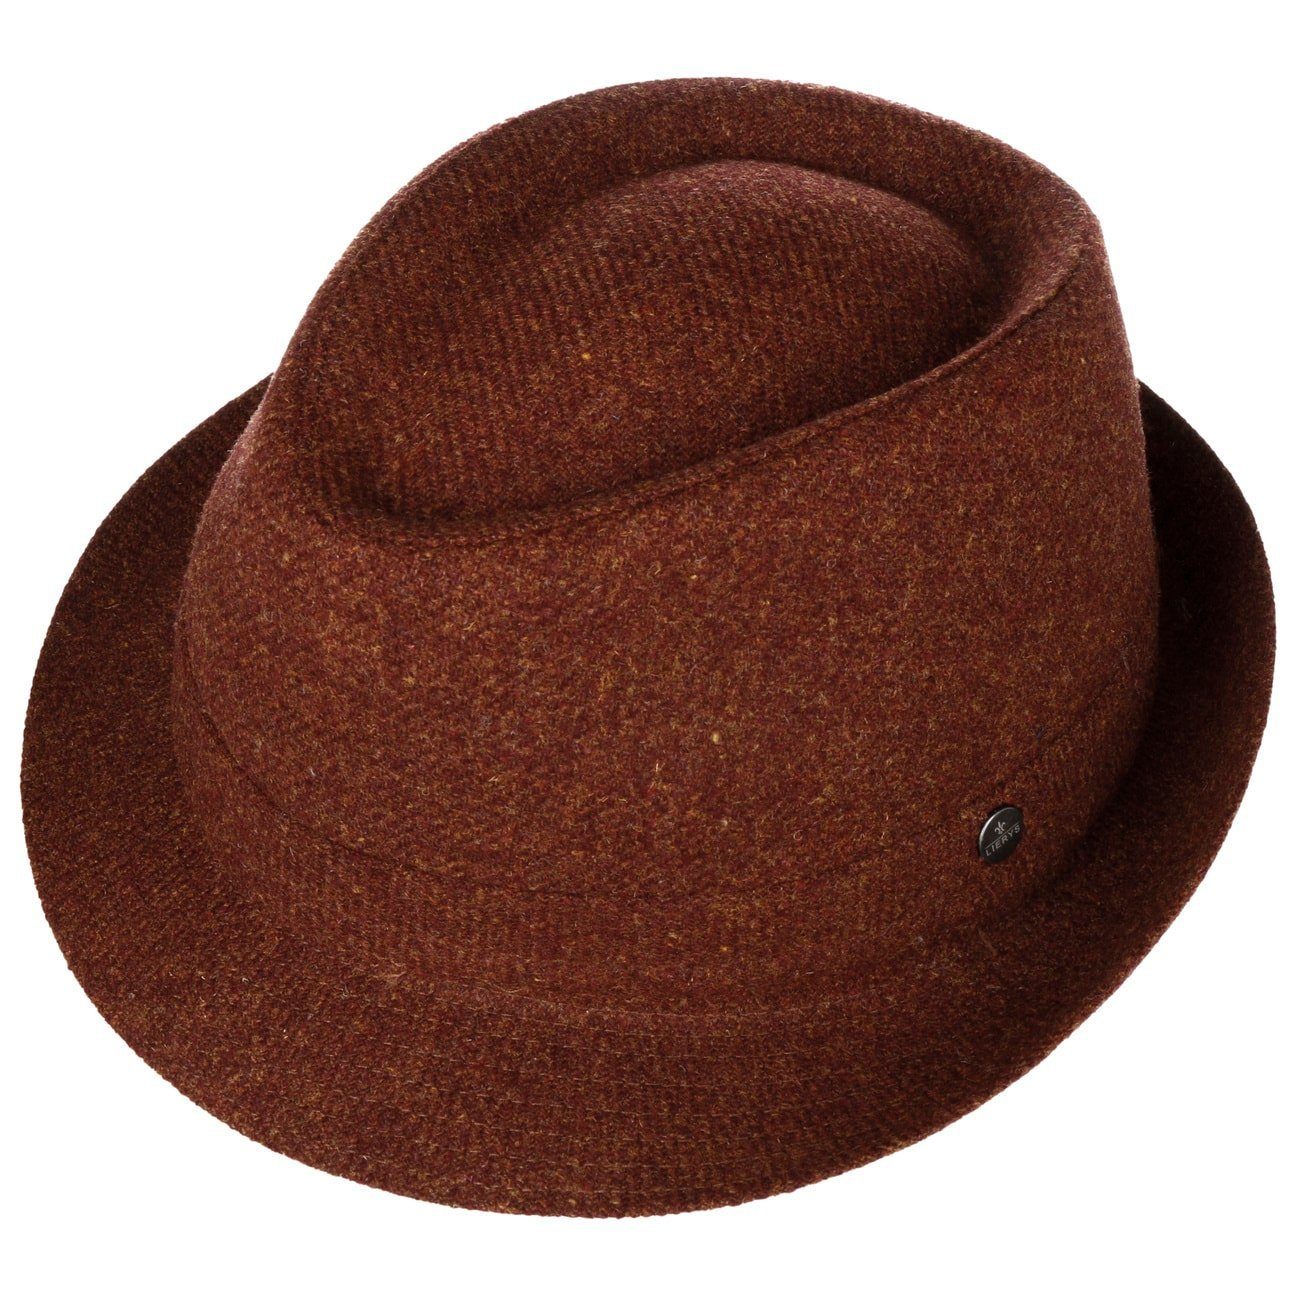 Lierys Trilby (1-St) Wolltrilby mit in Made Futter, rost Italy